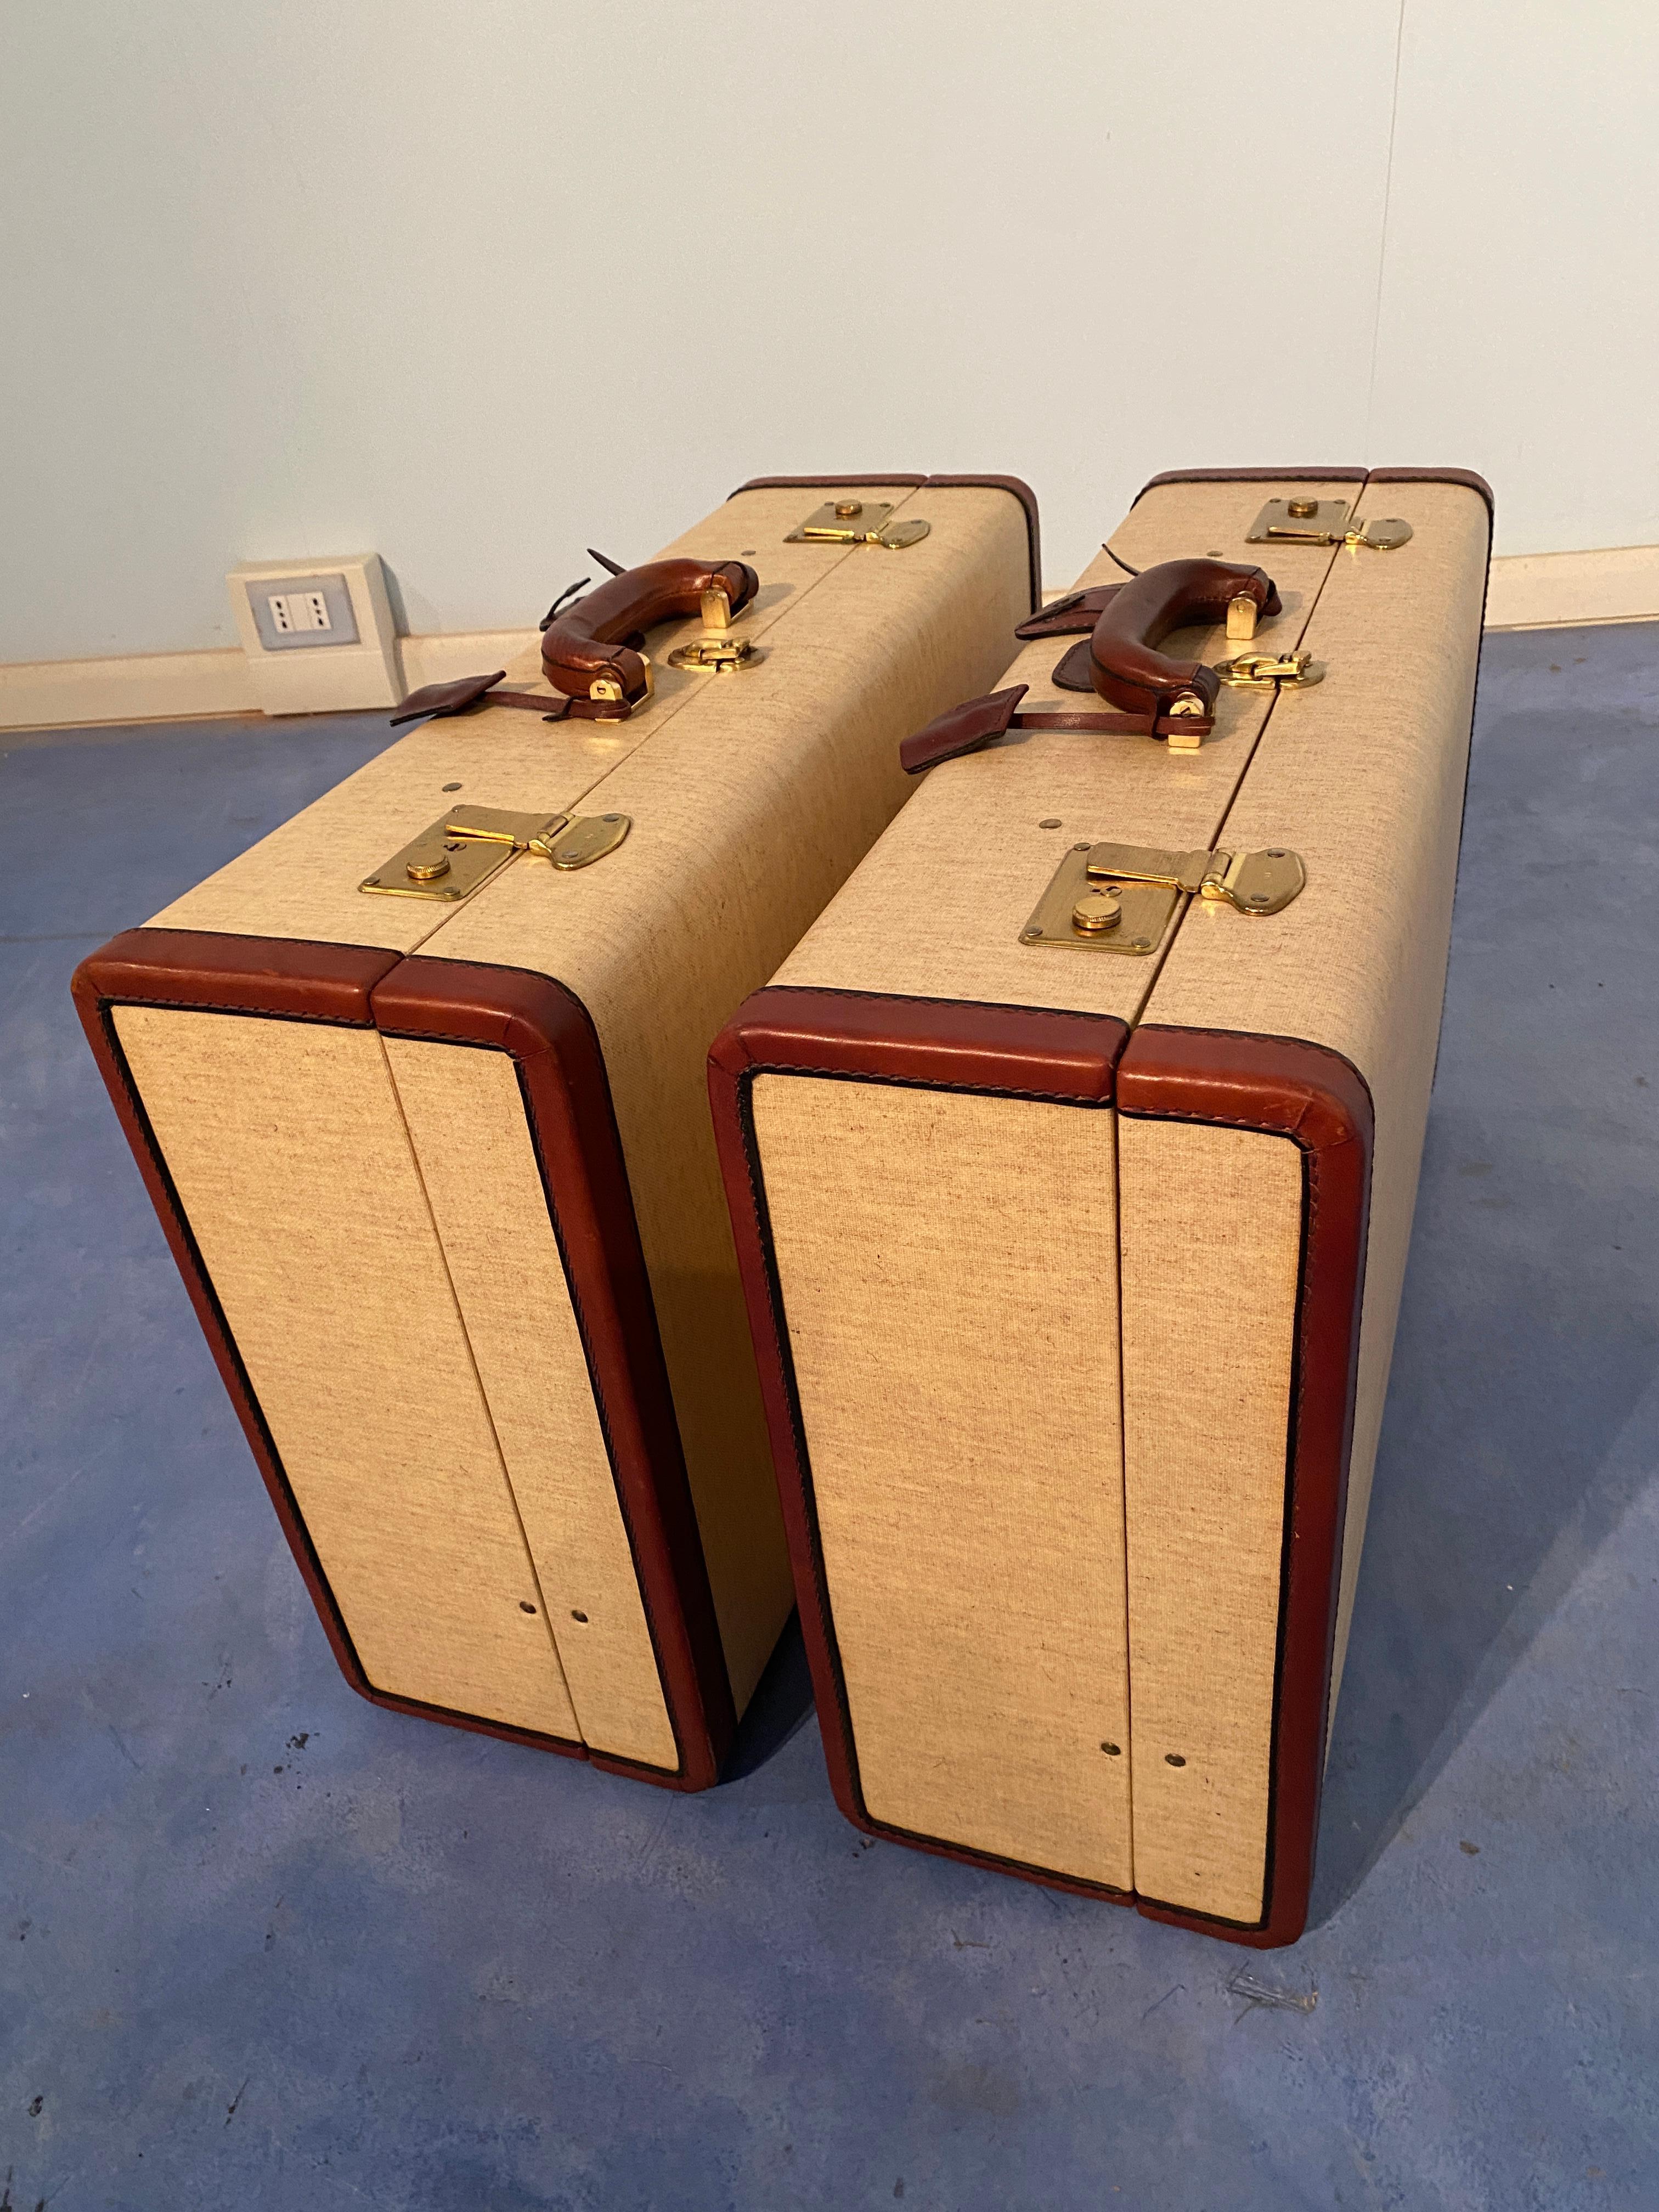 Italian Mid-Century Moder Luggages or Suitcases Mèlange Color, Set of Two, 1960 In Good Condition For Sale In Traversetolo, IT